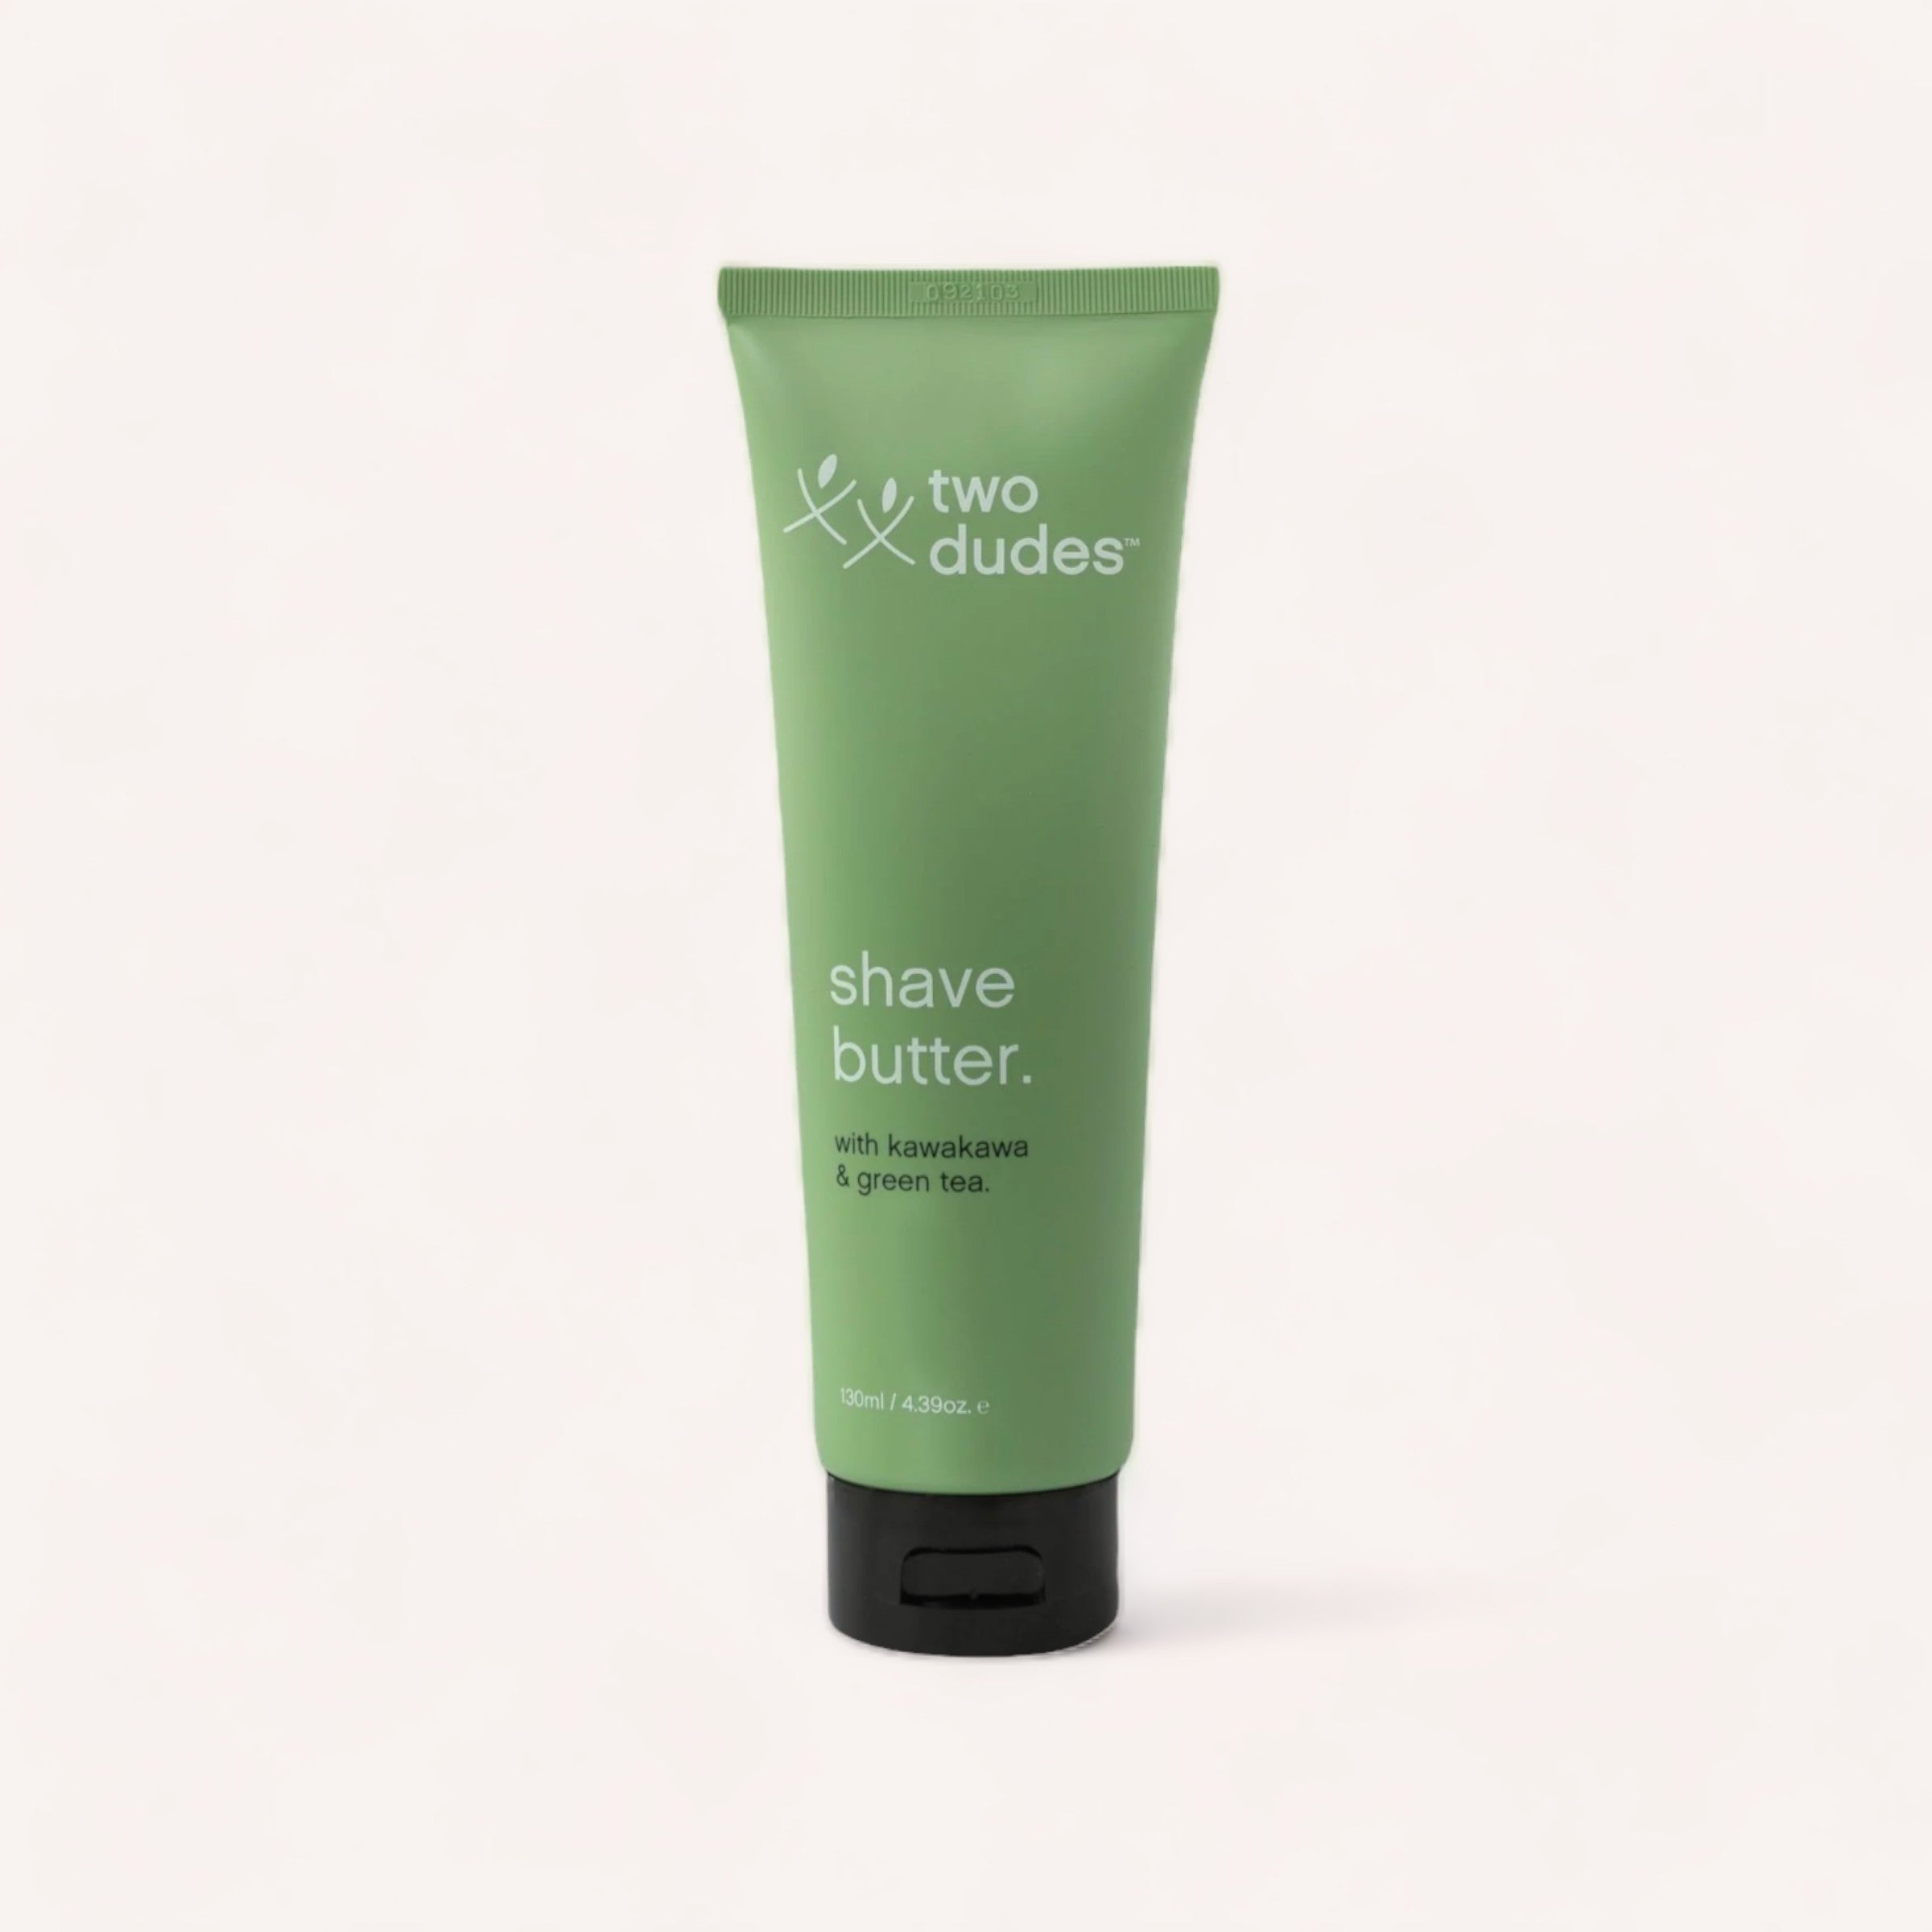 A green tube of Two Dudes brand Shave Butter by Two Dudes with kawakawa & green tea, formulated to reduce skin irritation and razor burn, against a clean, white background.